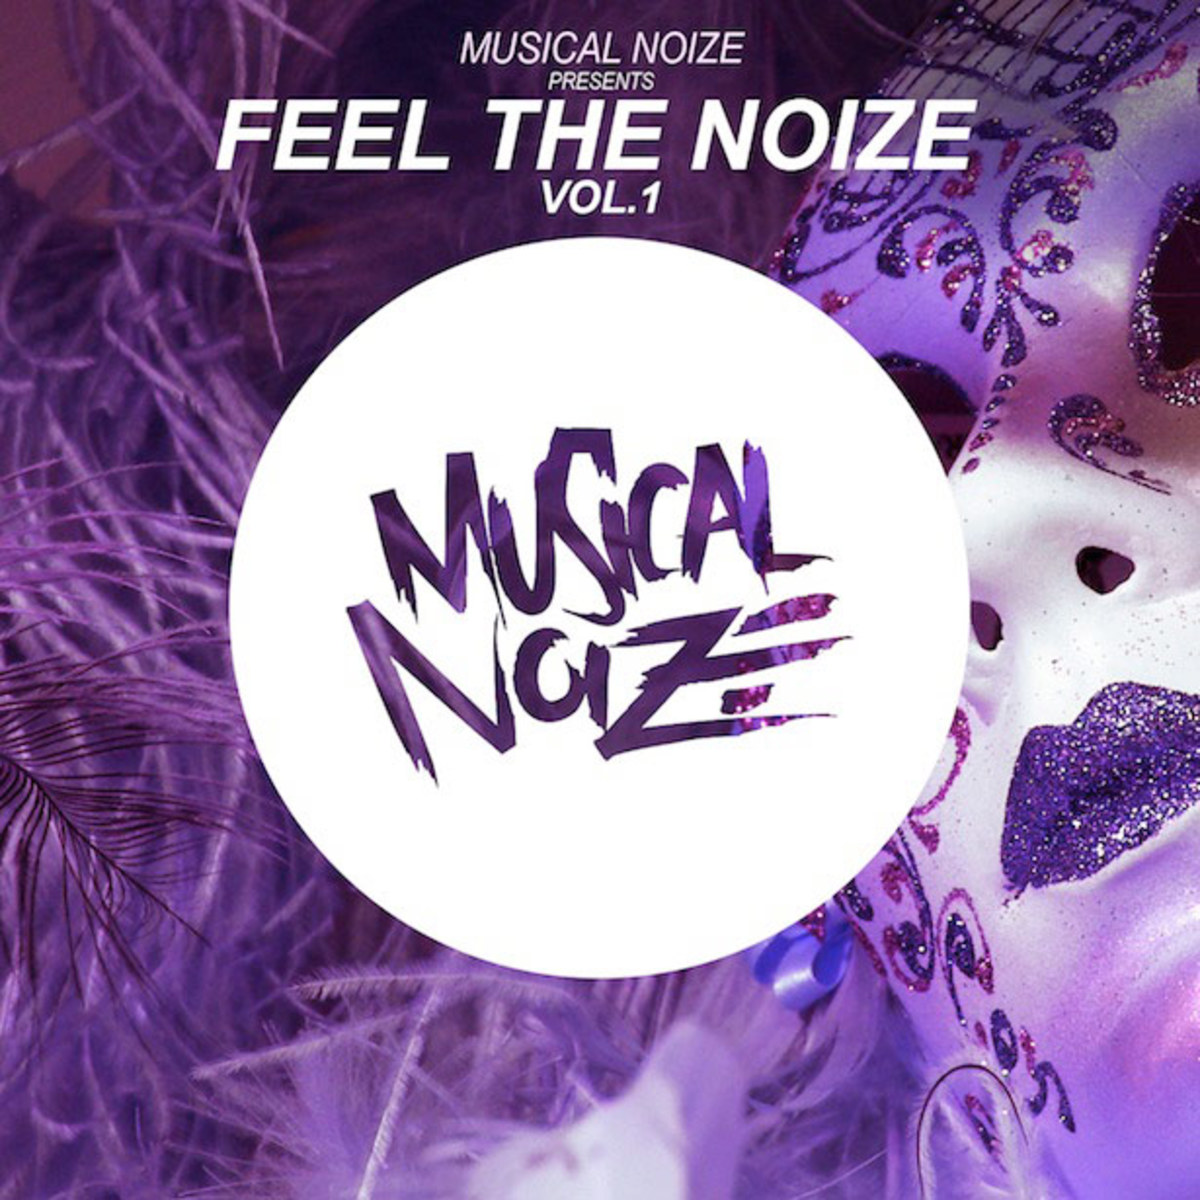 Label Spotlight: Musical Noize To Release 'Feel The Noize Vol. 1' Compilation Dec. 30 - New Electronic Music